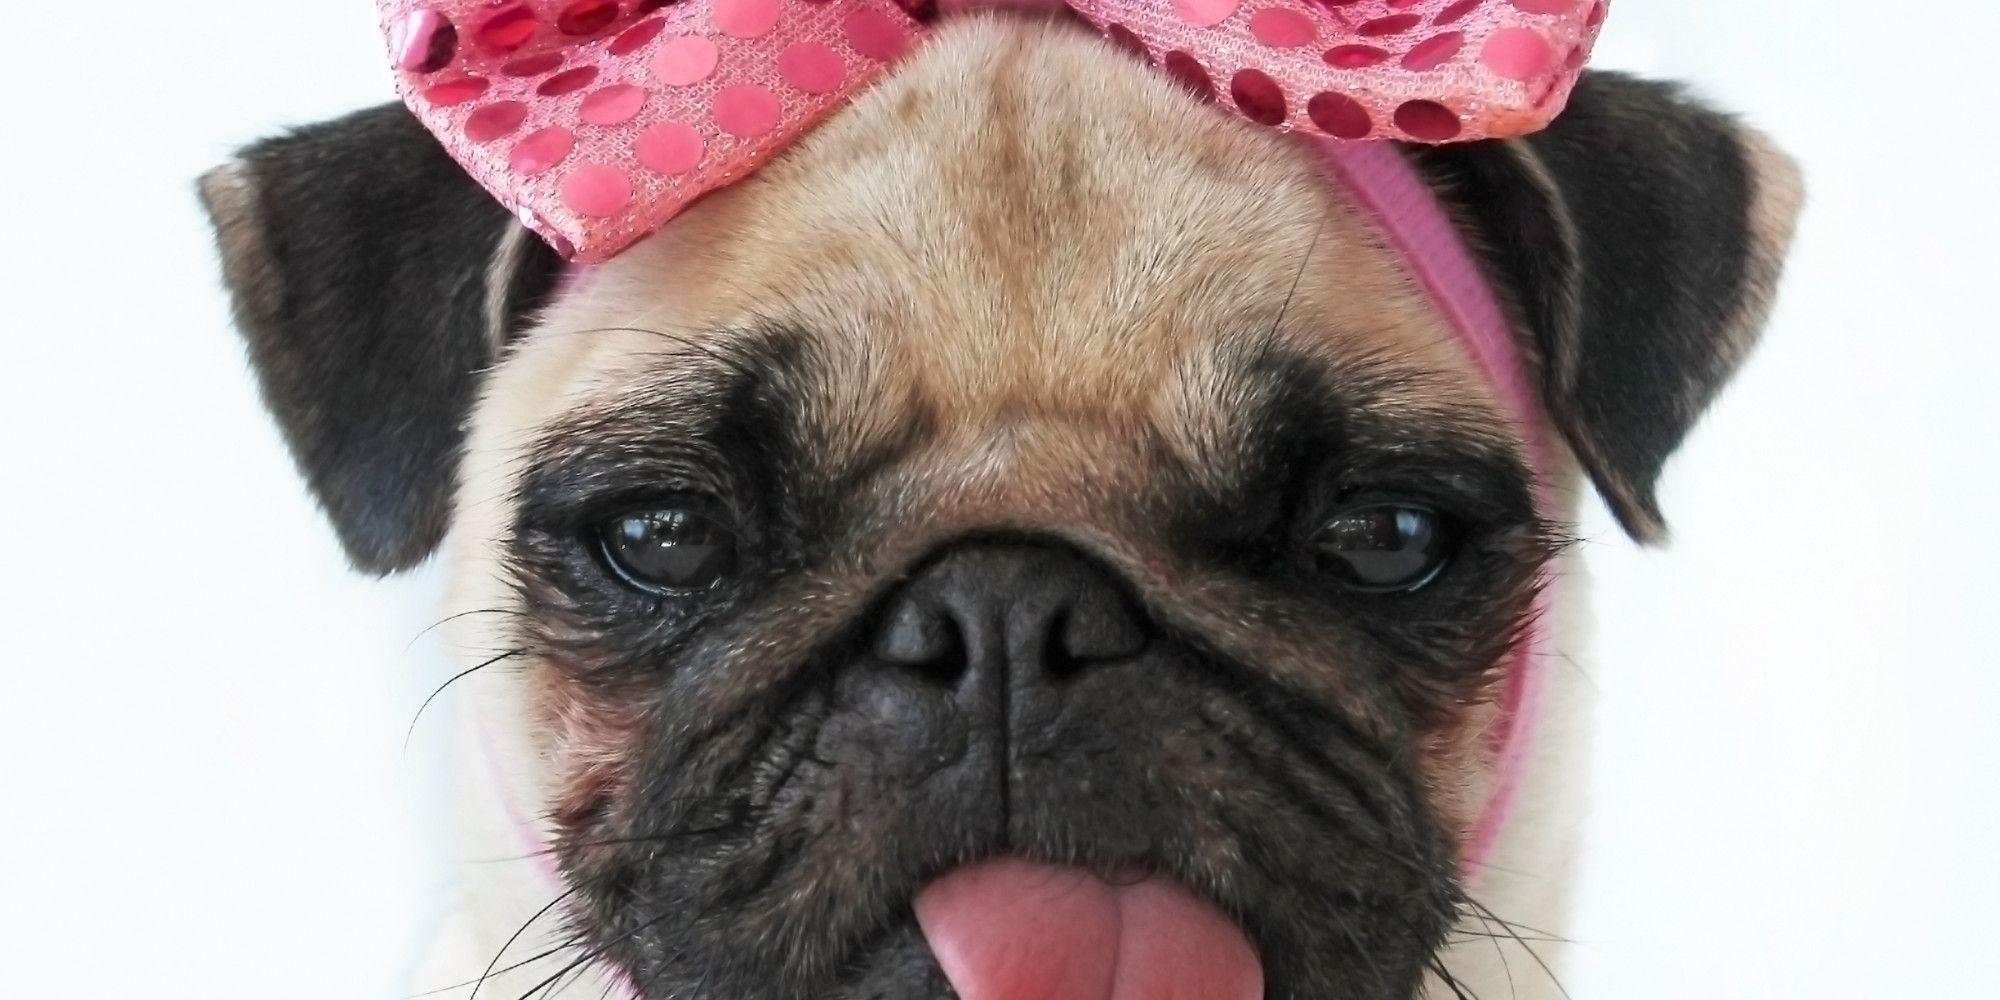 Cute Pug dog with rose bow photo and wallpaper. Beautiful